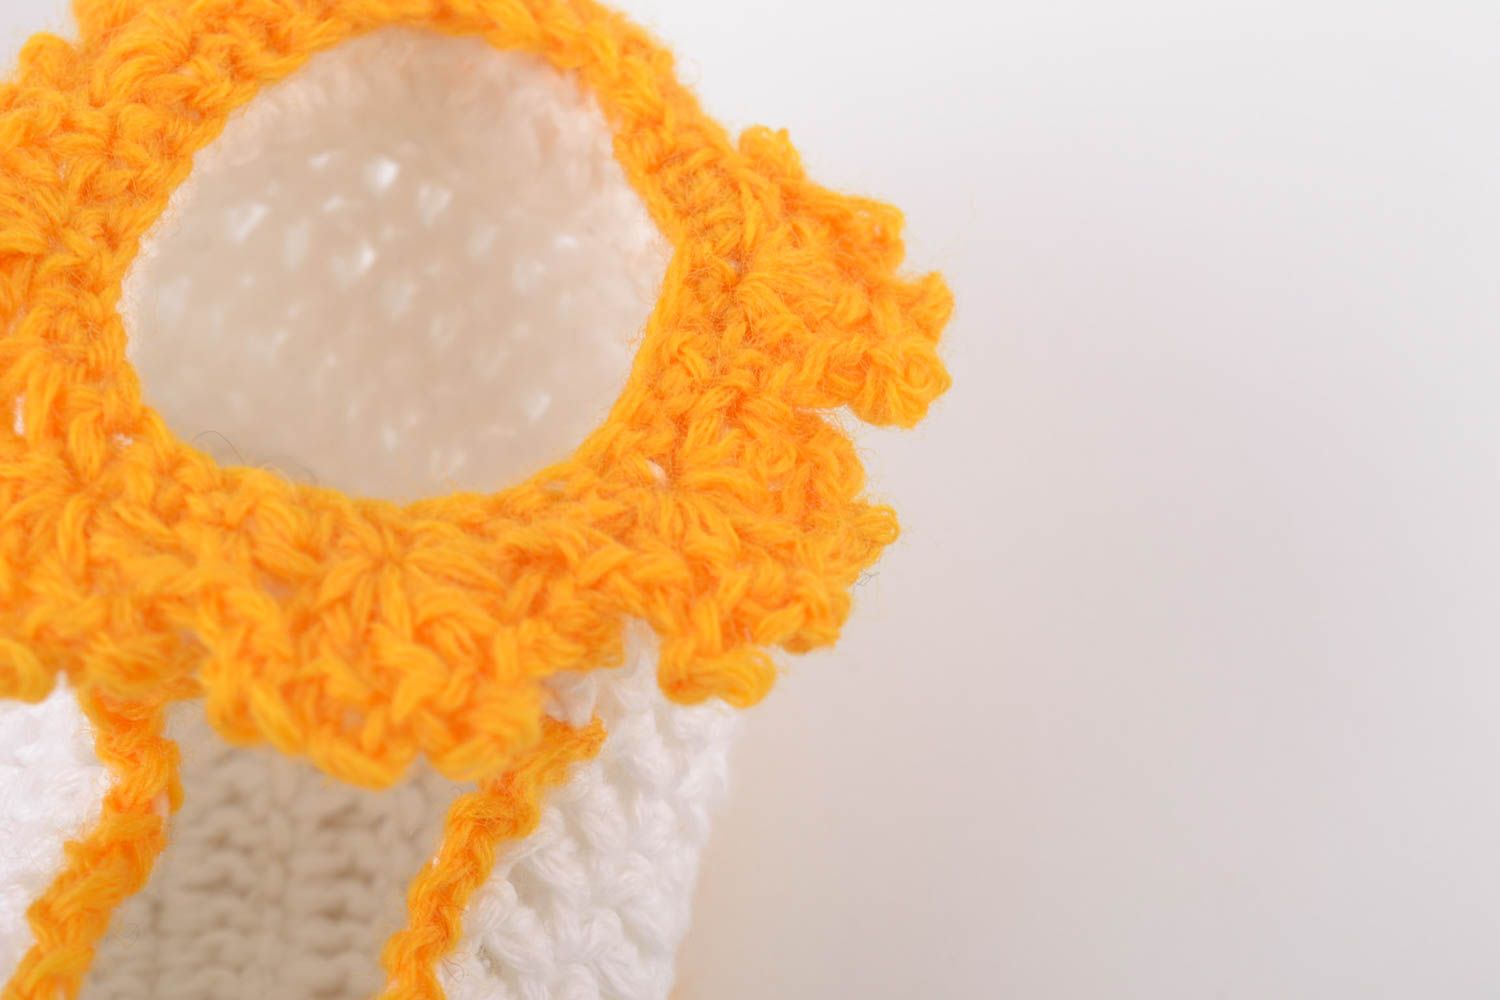 Handmade baby booties crocheted of natural white and orange cotton threads photo 3